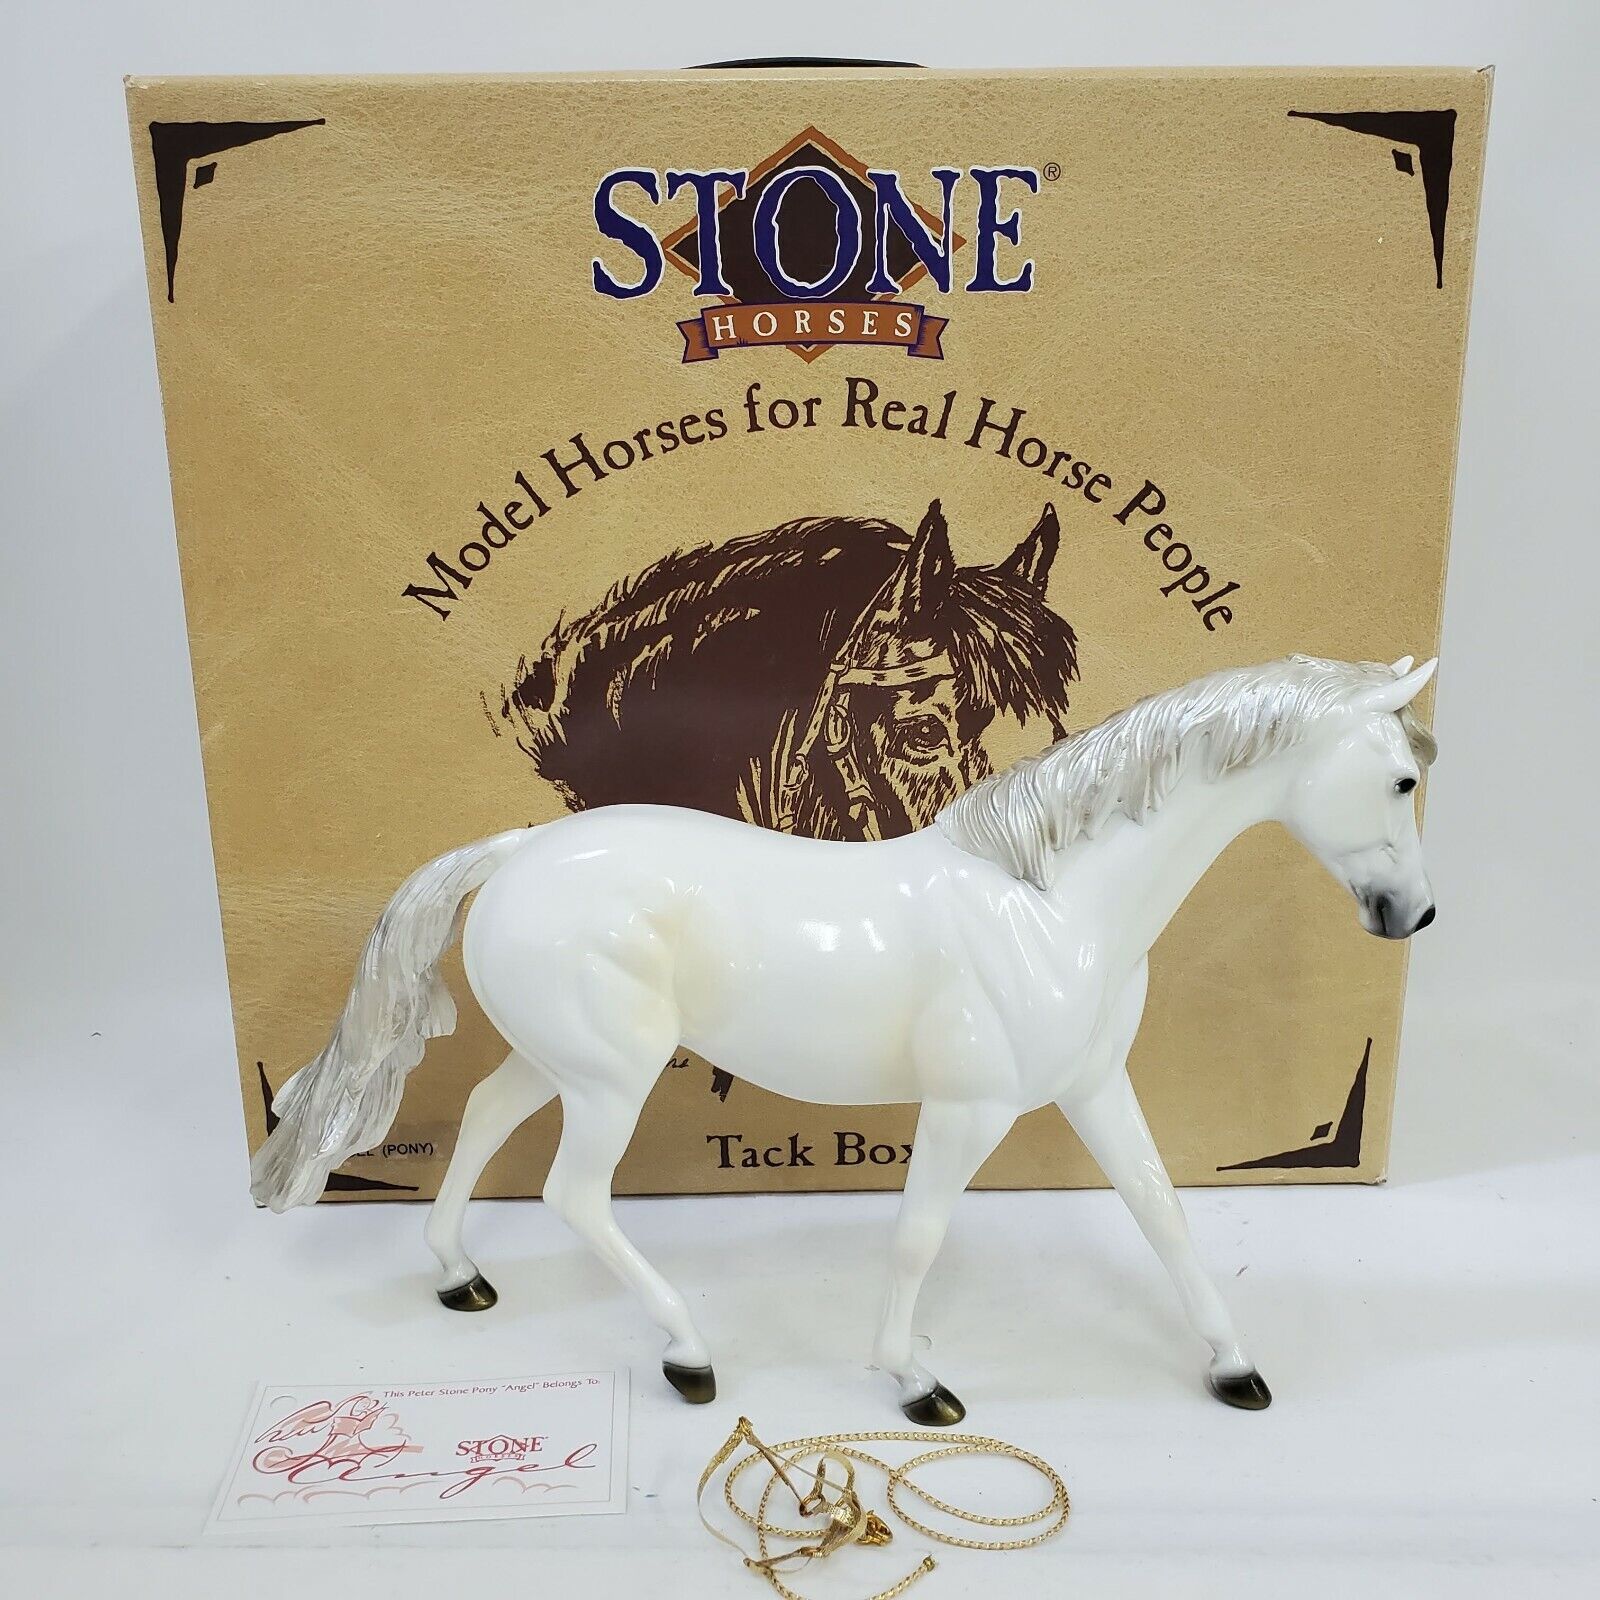 2001 Peter Stone Angel Christmas Pony Glossy White with Gold Reigns 9913 in Box